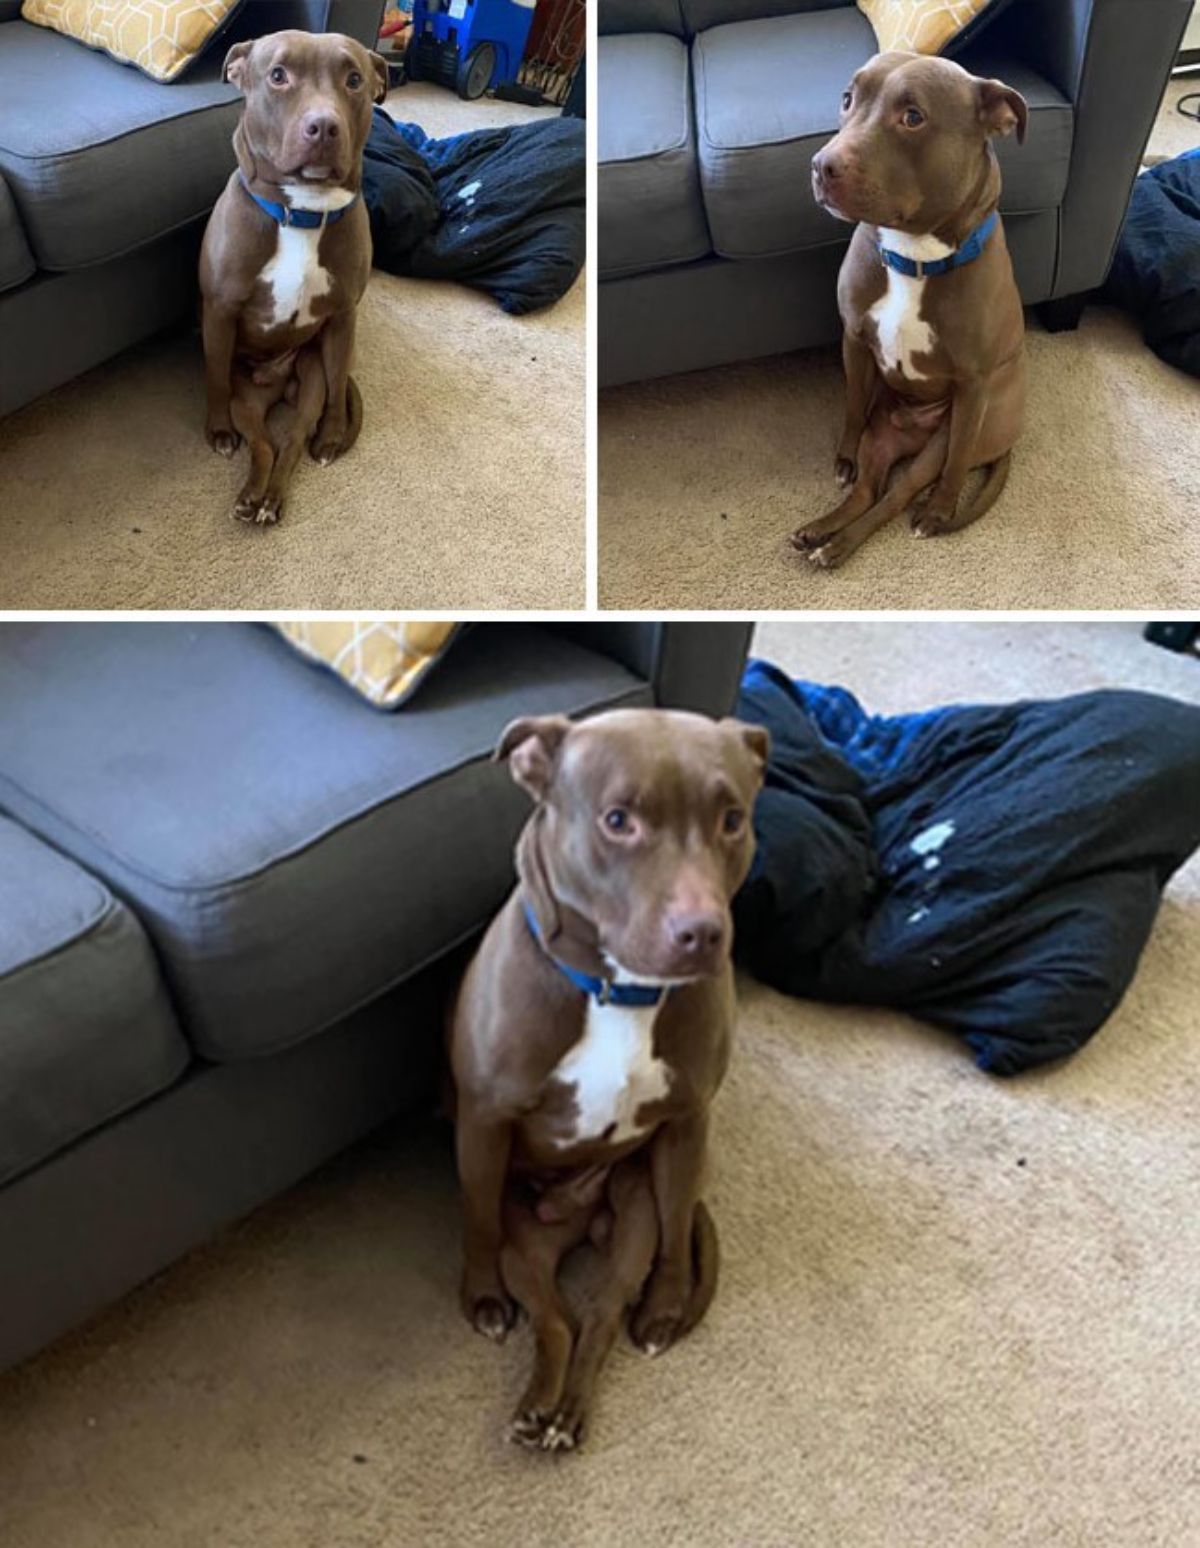 3 photos of a brown and white pitbull sitting on its haunches with the back legs stretched between the front legs